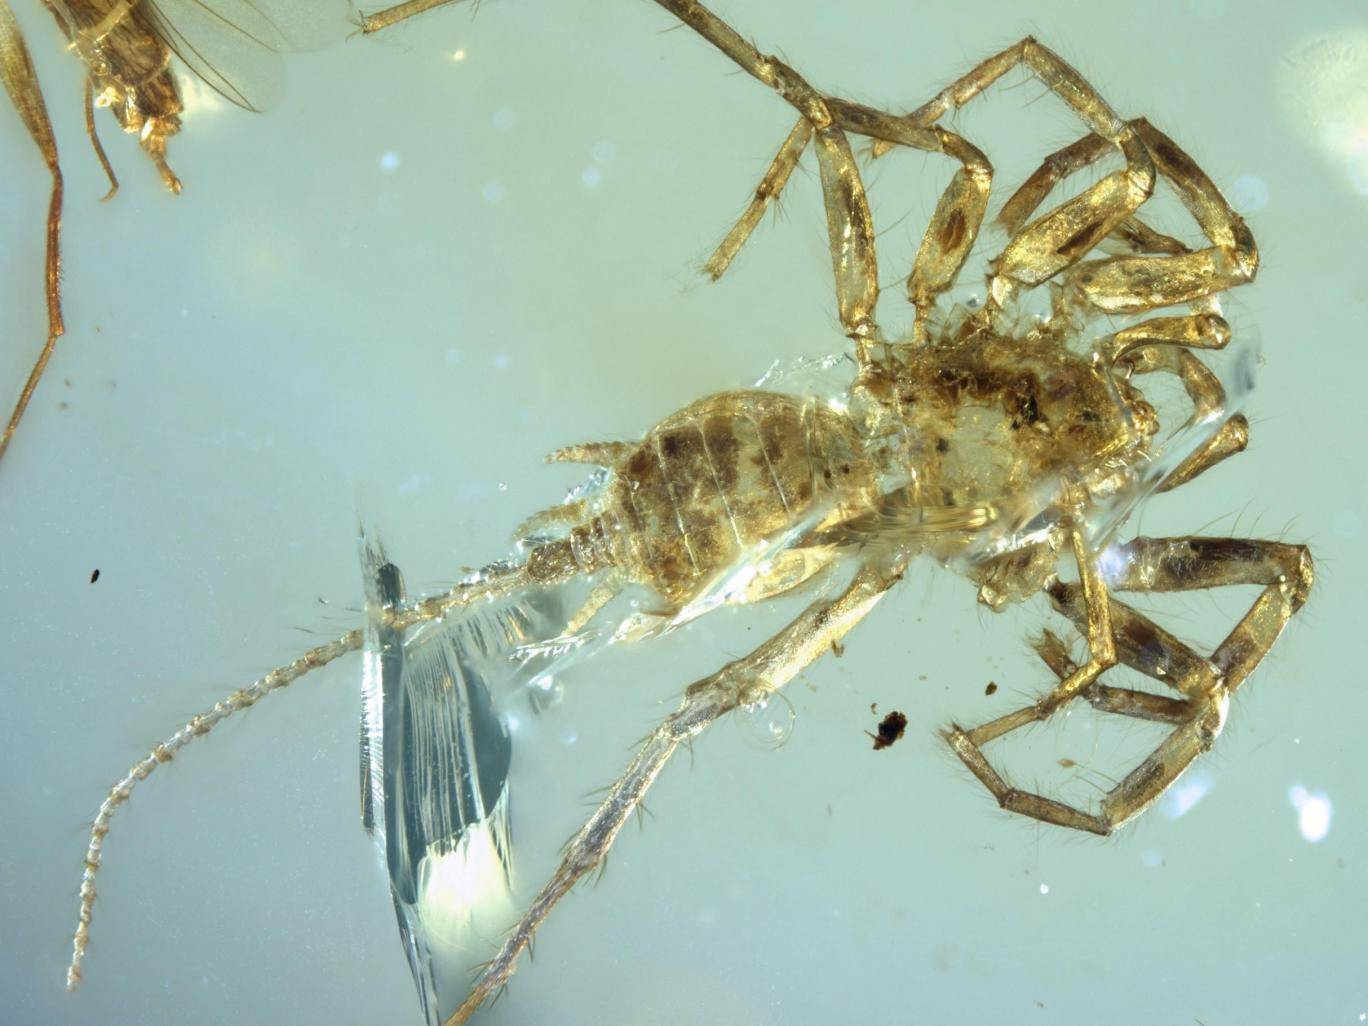 Arachnophobes take heed: ancient spider found in Burma had a whip-like tail